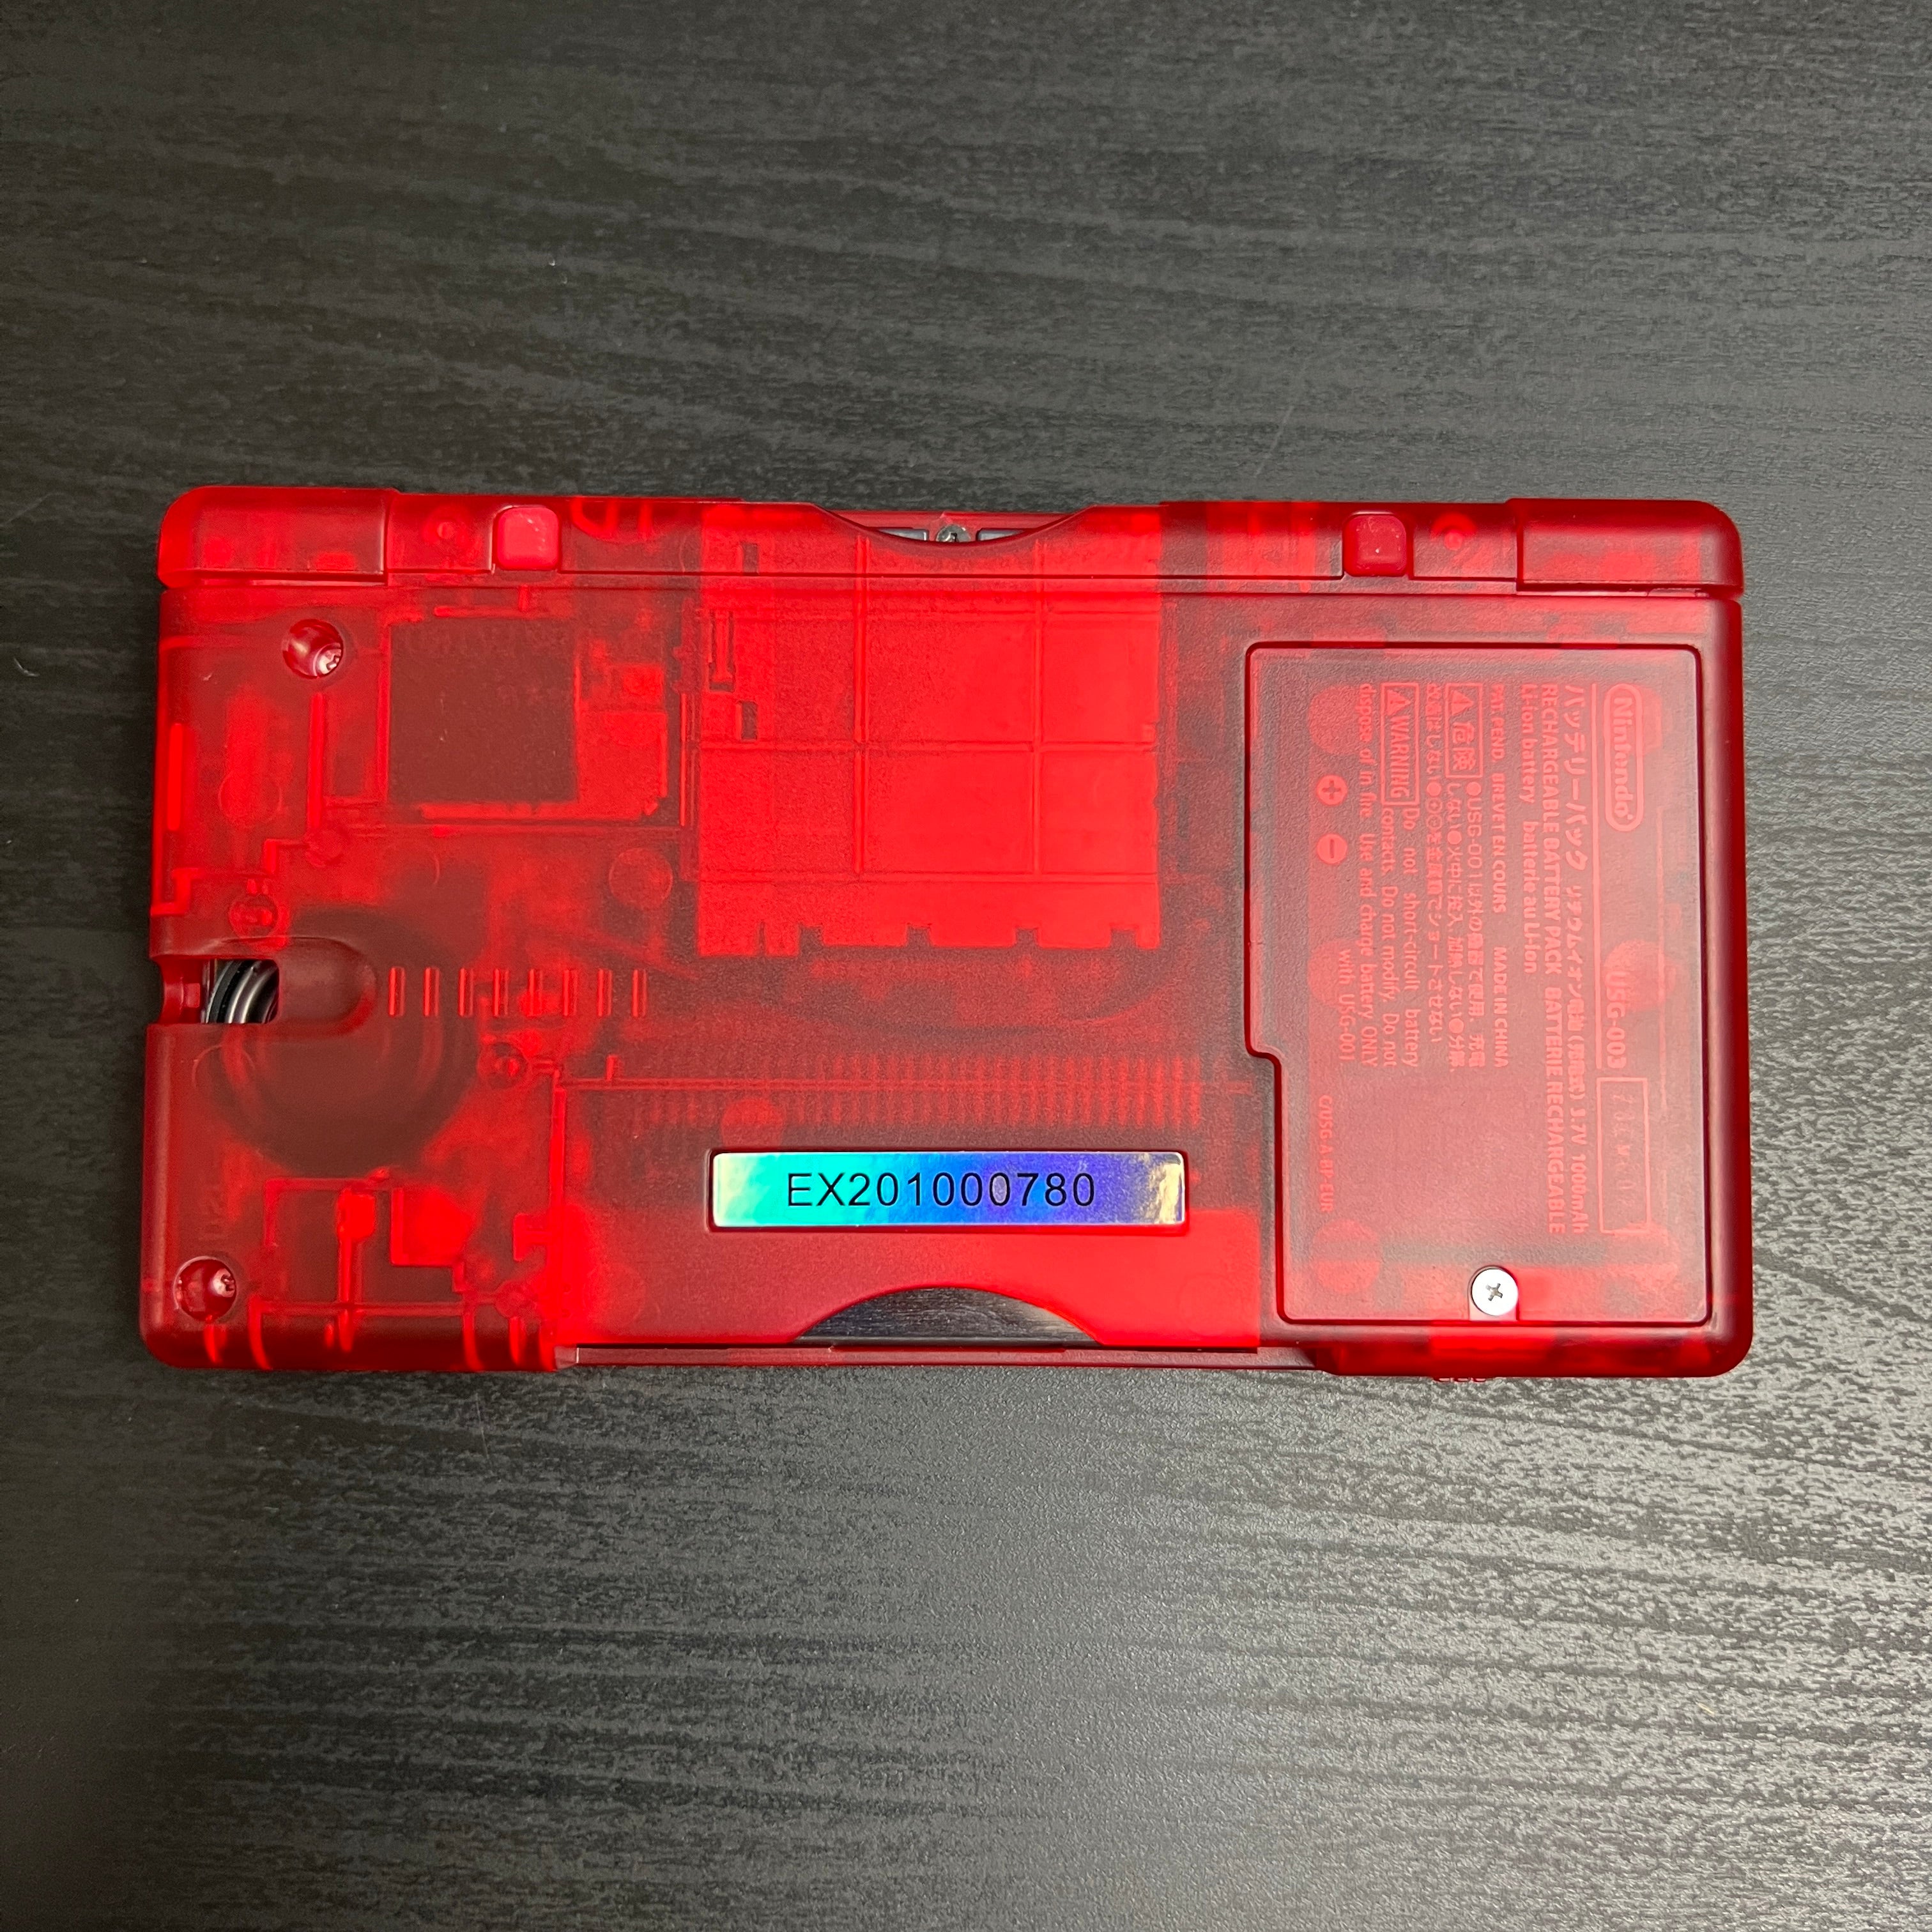 Game Boy Macro (All Clear Red)